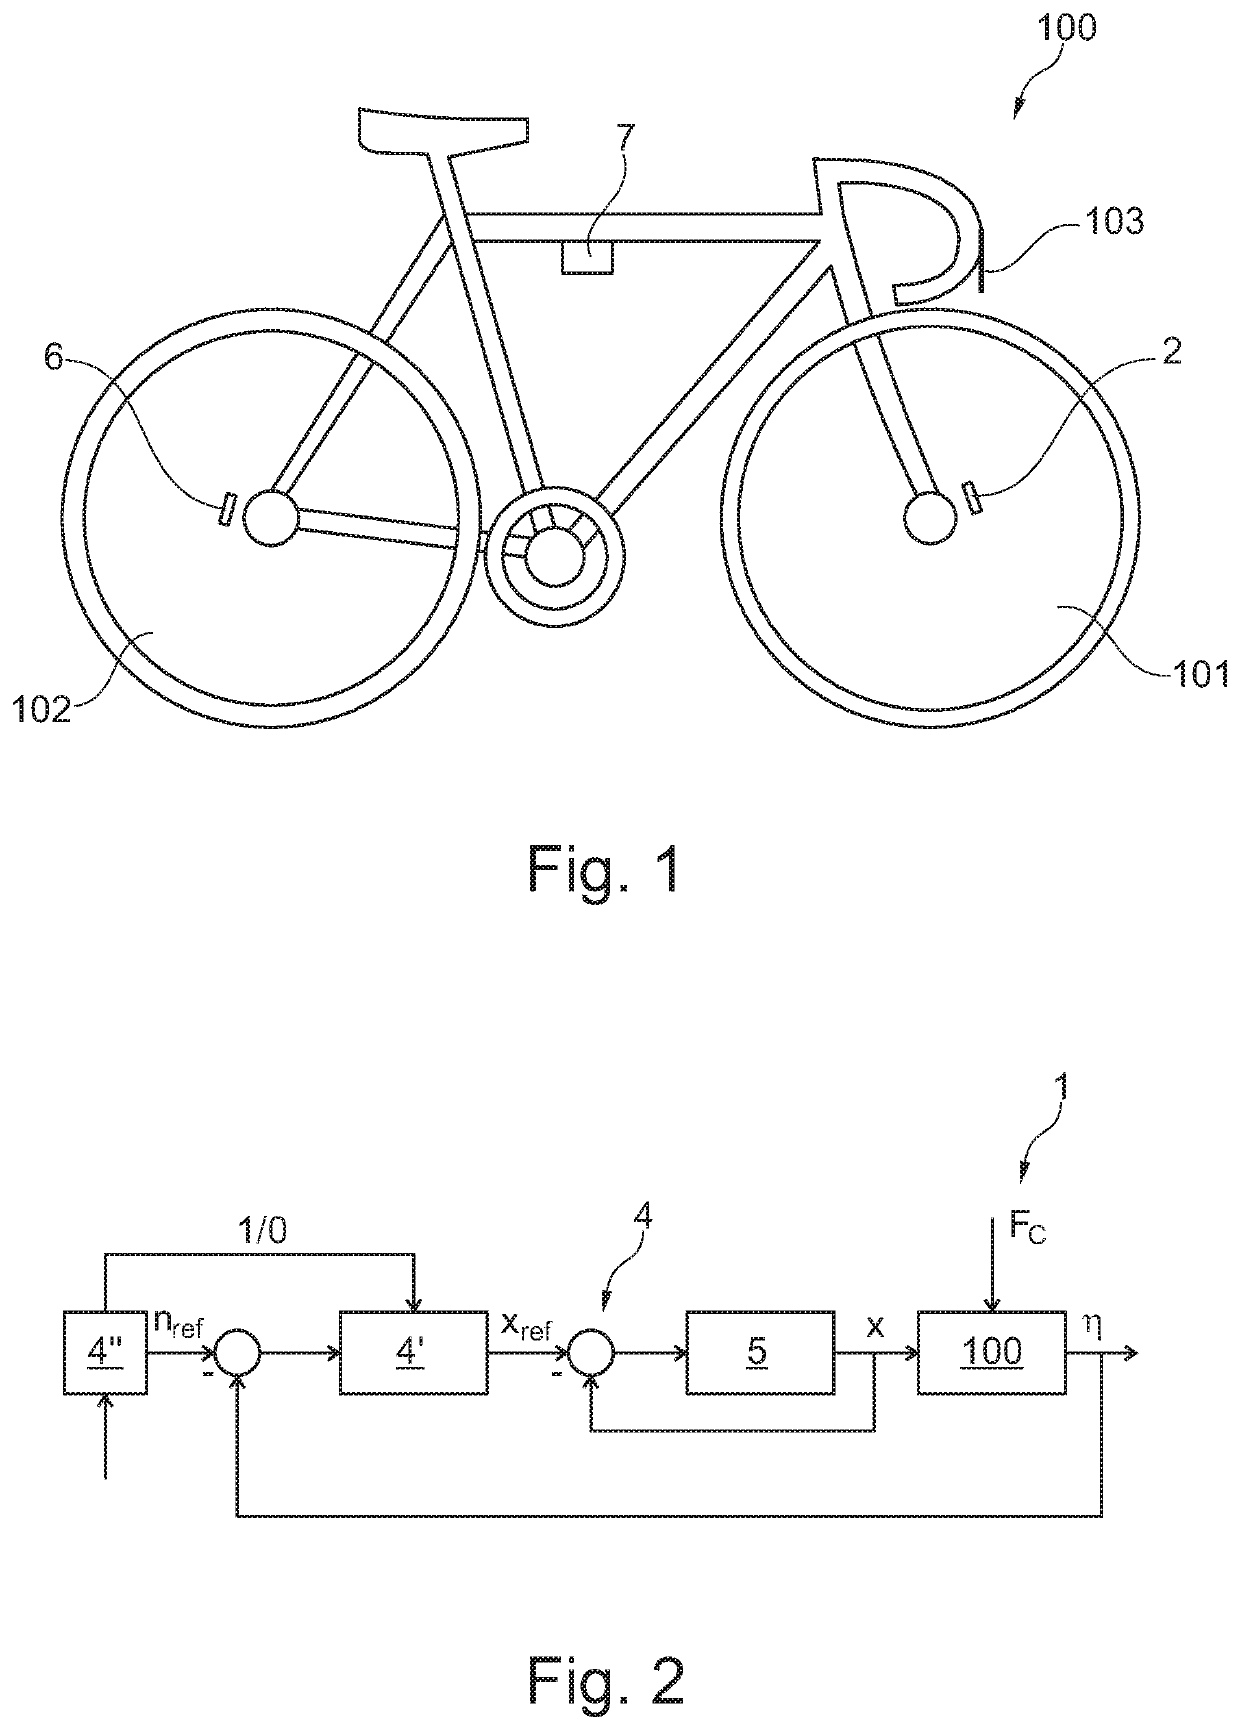 Brake Assist System For A Cyclist On a Bicycle